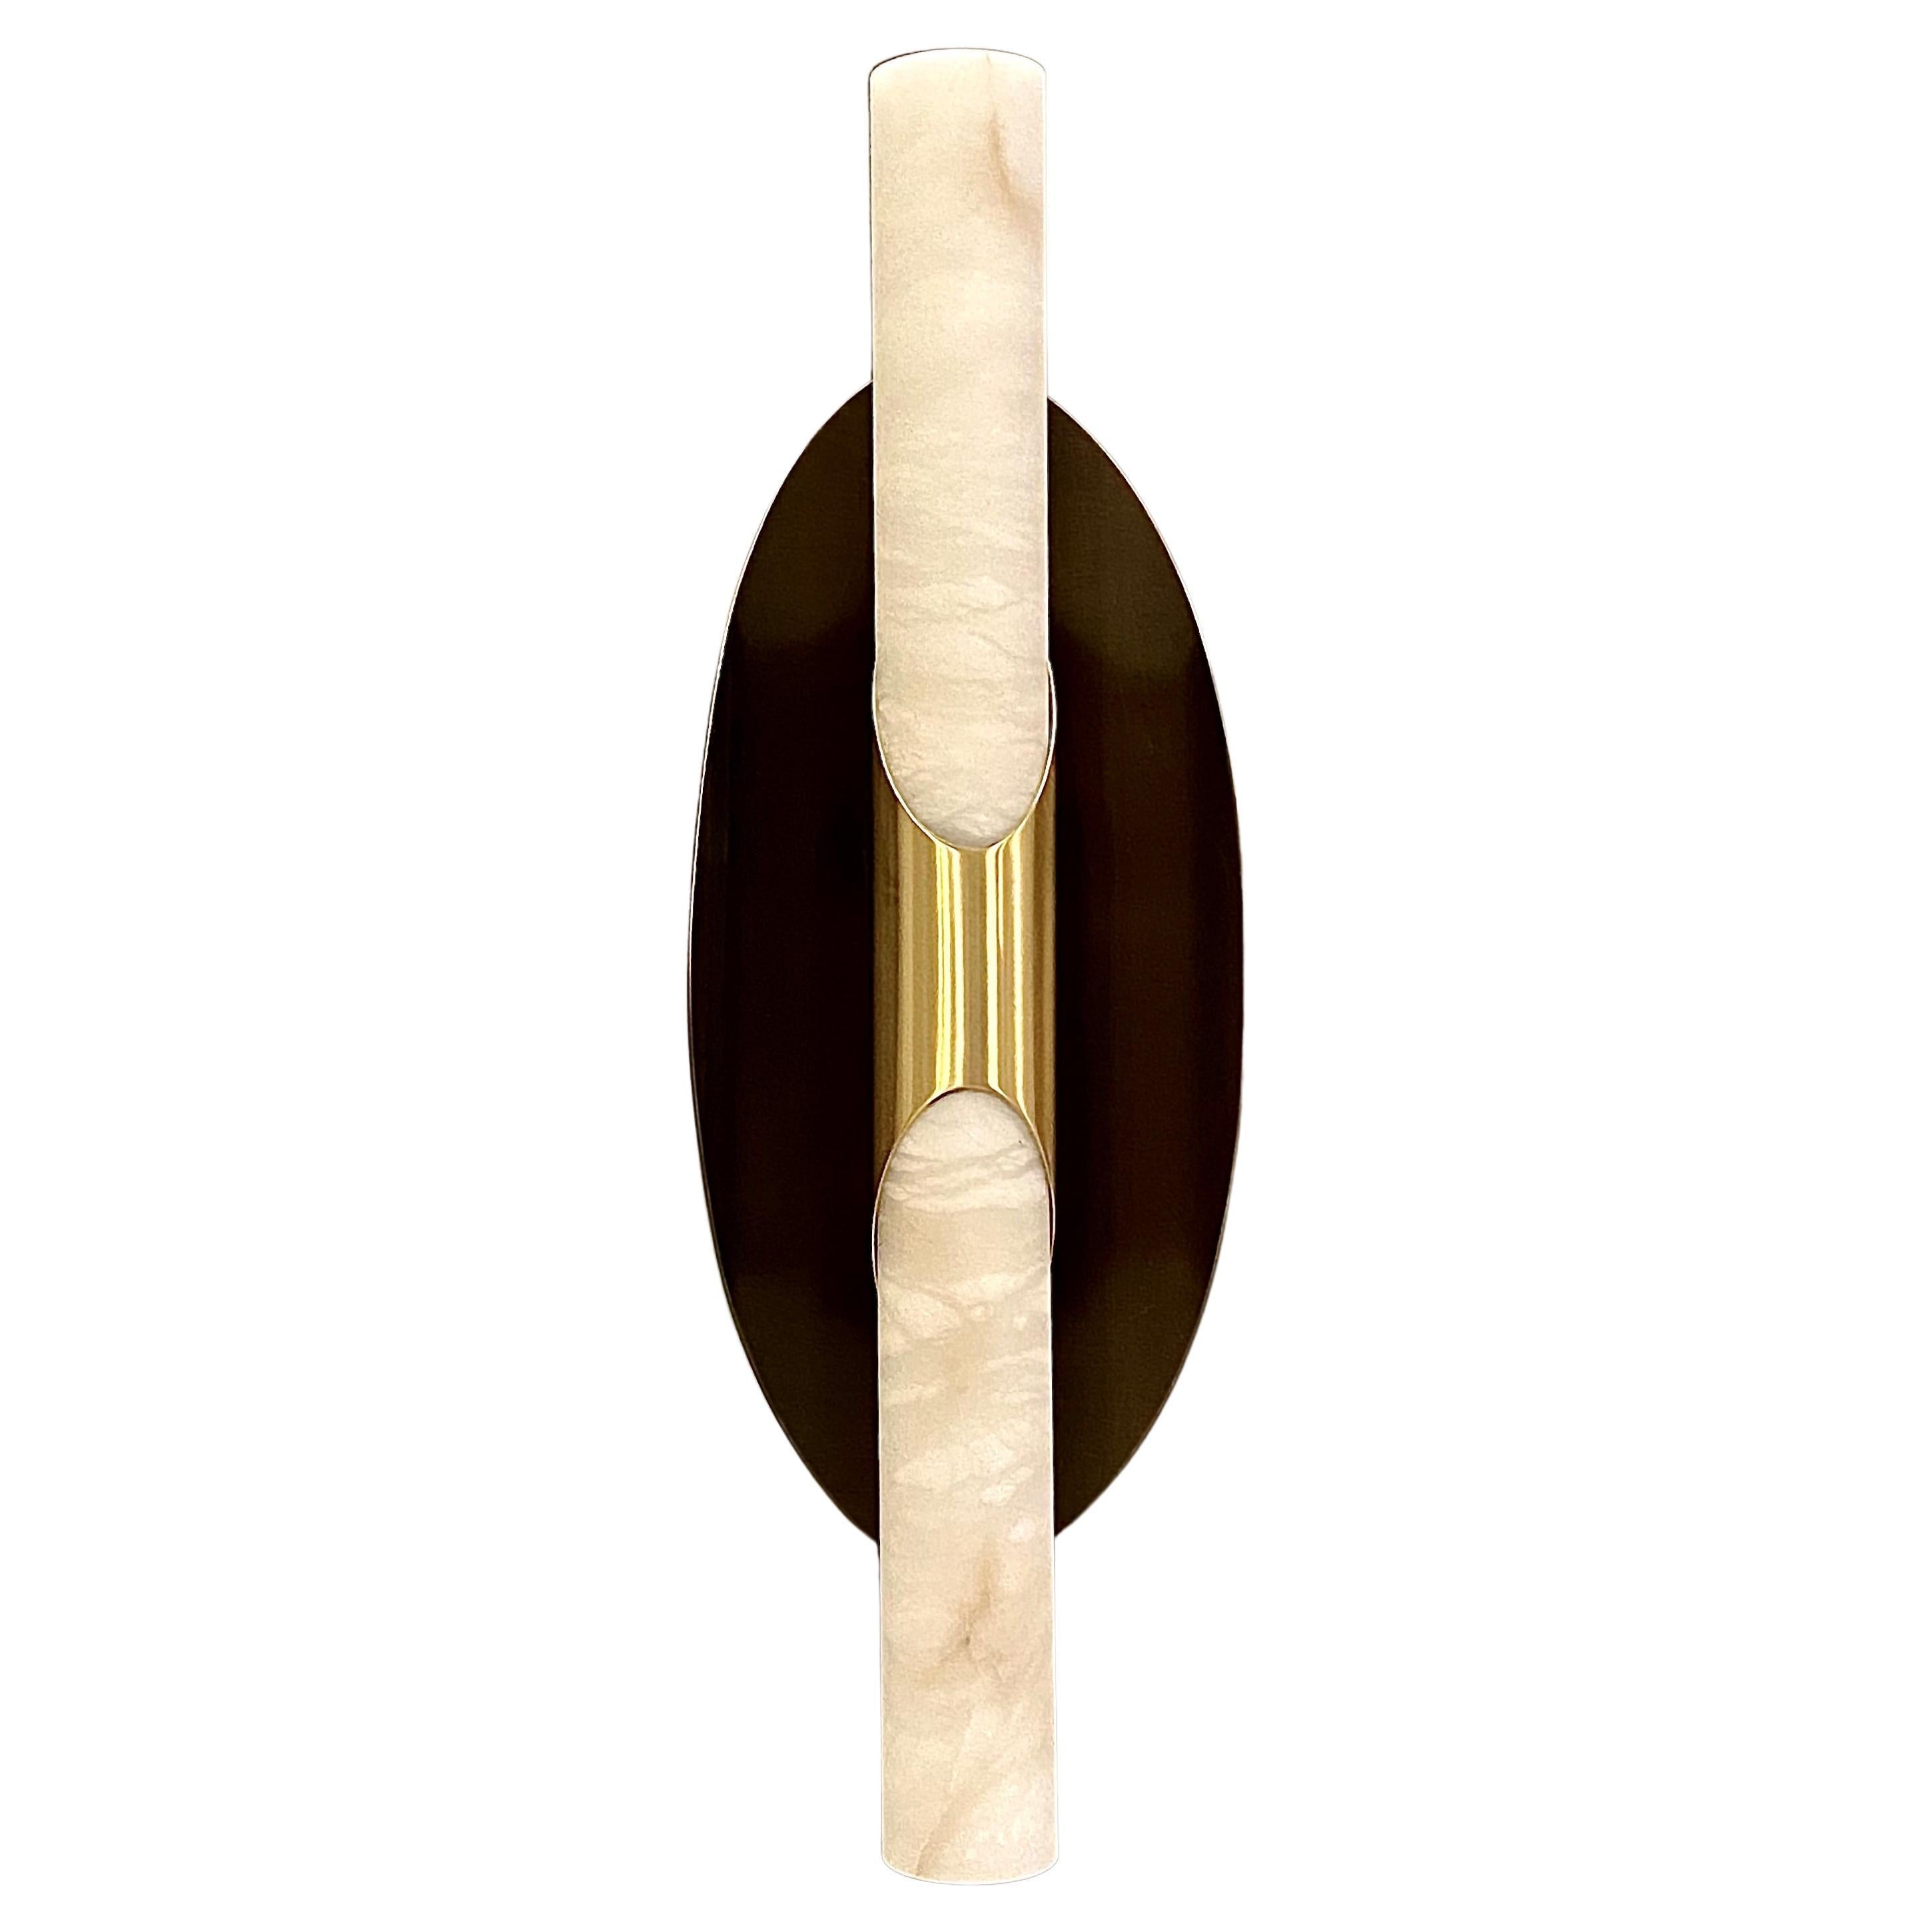 Outstanding Italian Alabaster Wall Sconce "Manta"